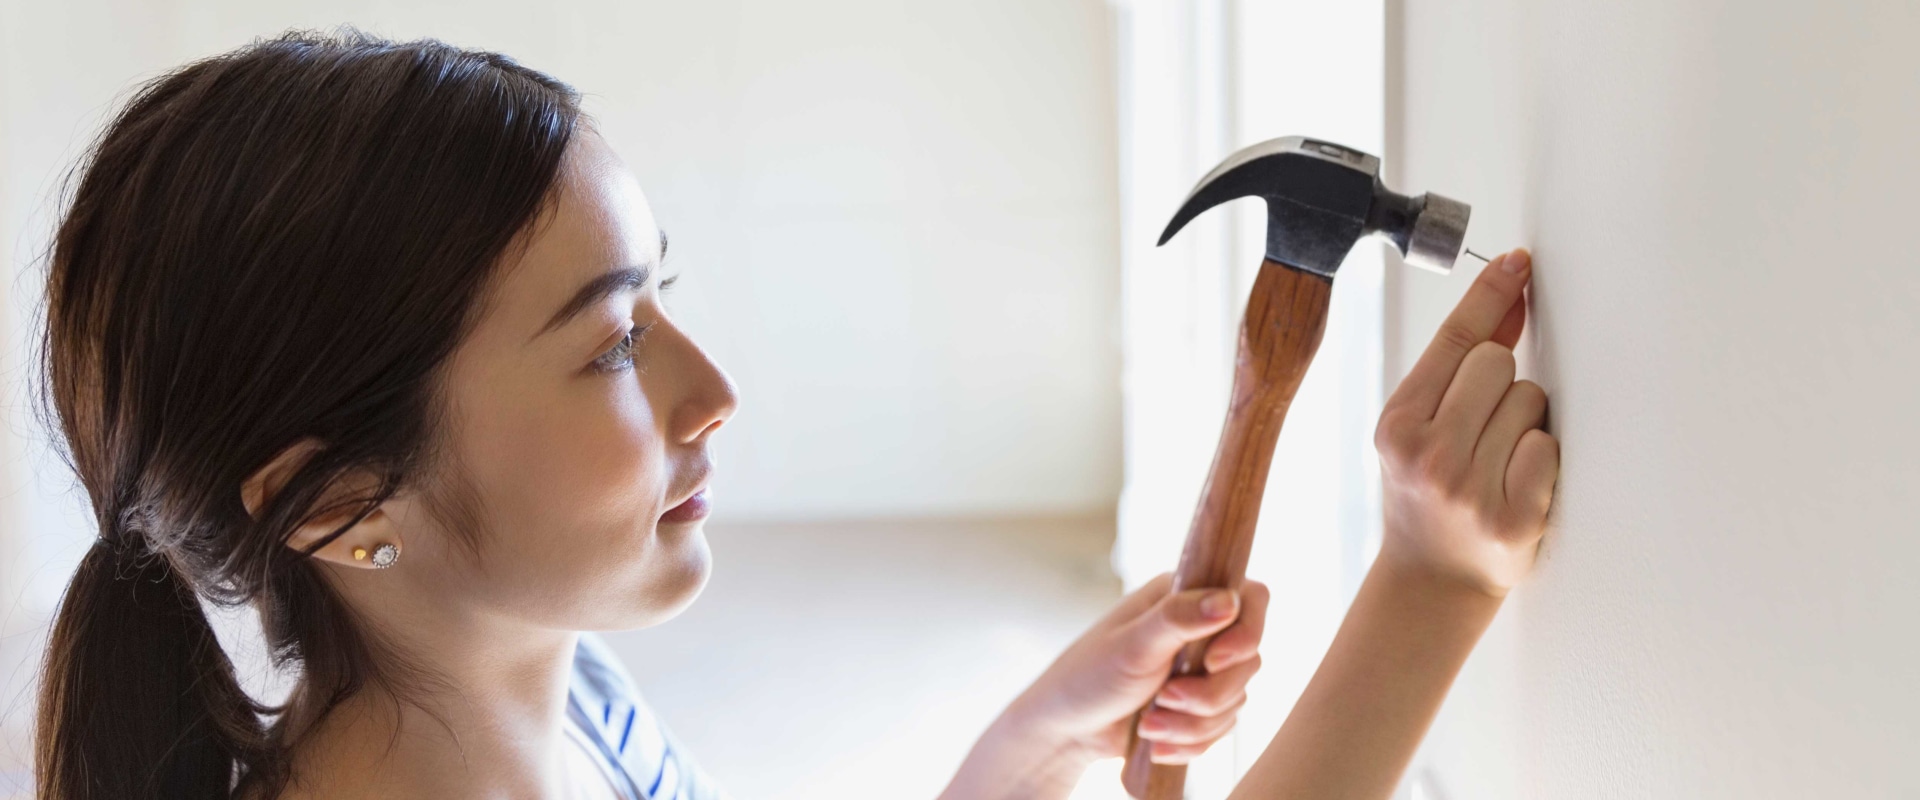 How can i stop stressing about home repairs?